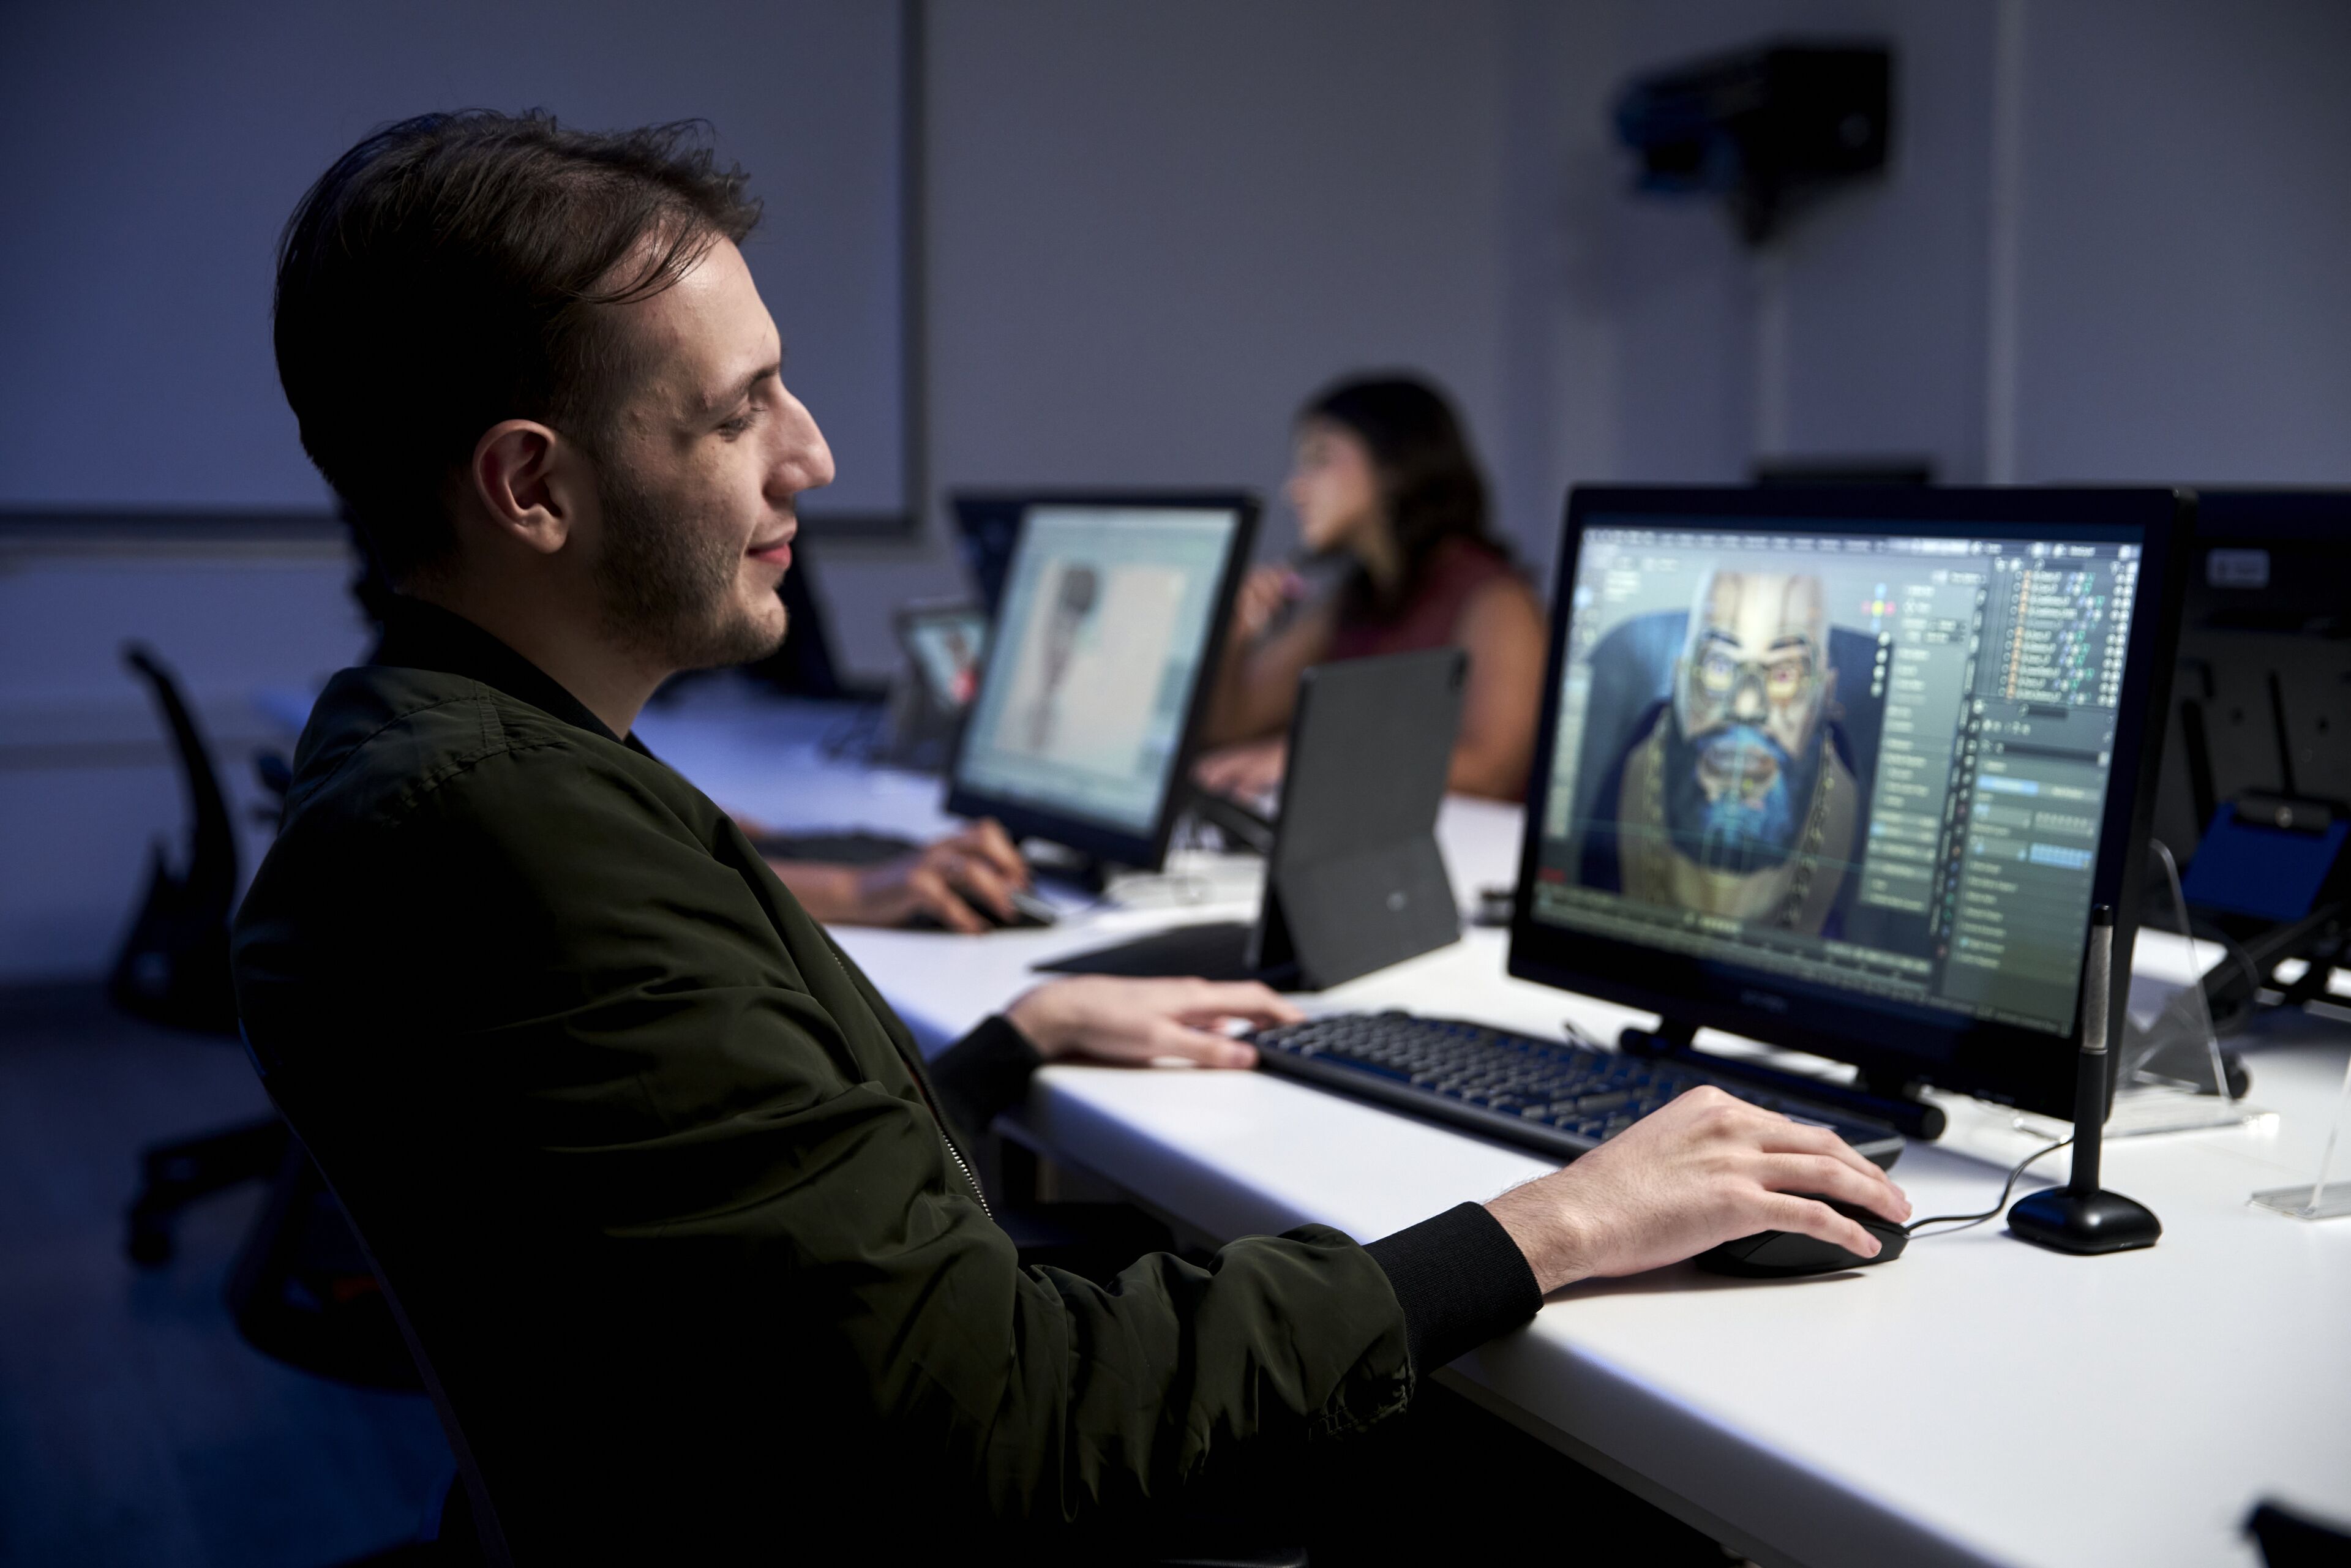 A focused male 3D artist works on a character model in a dimly lit digital animation studio.